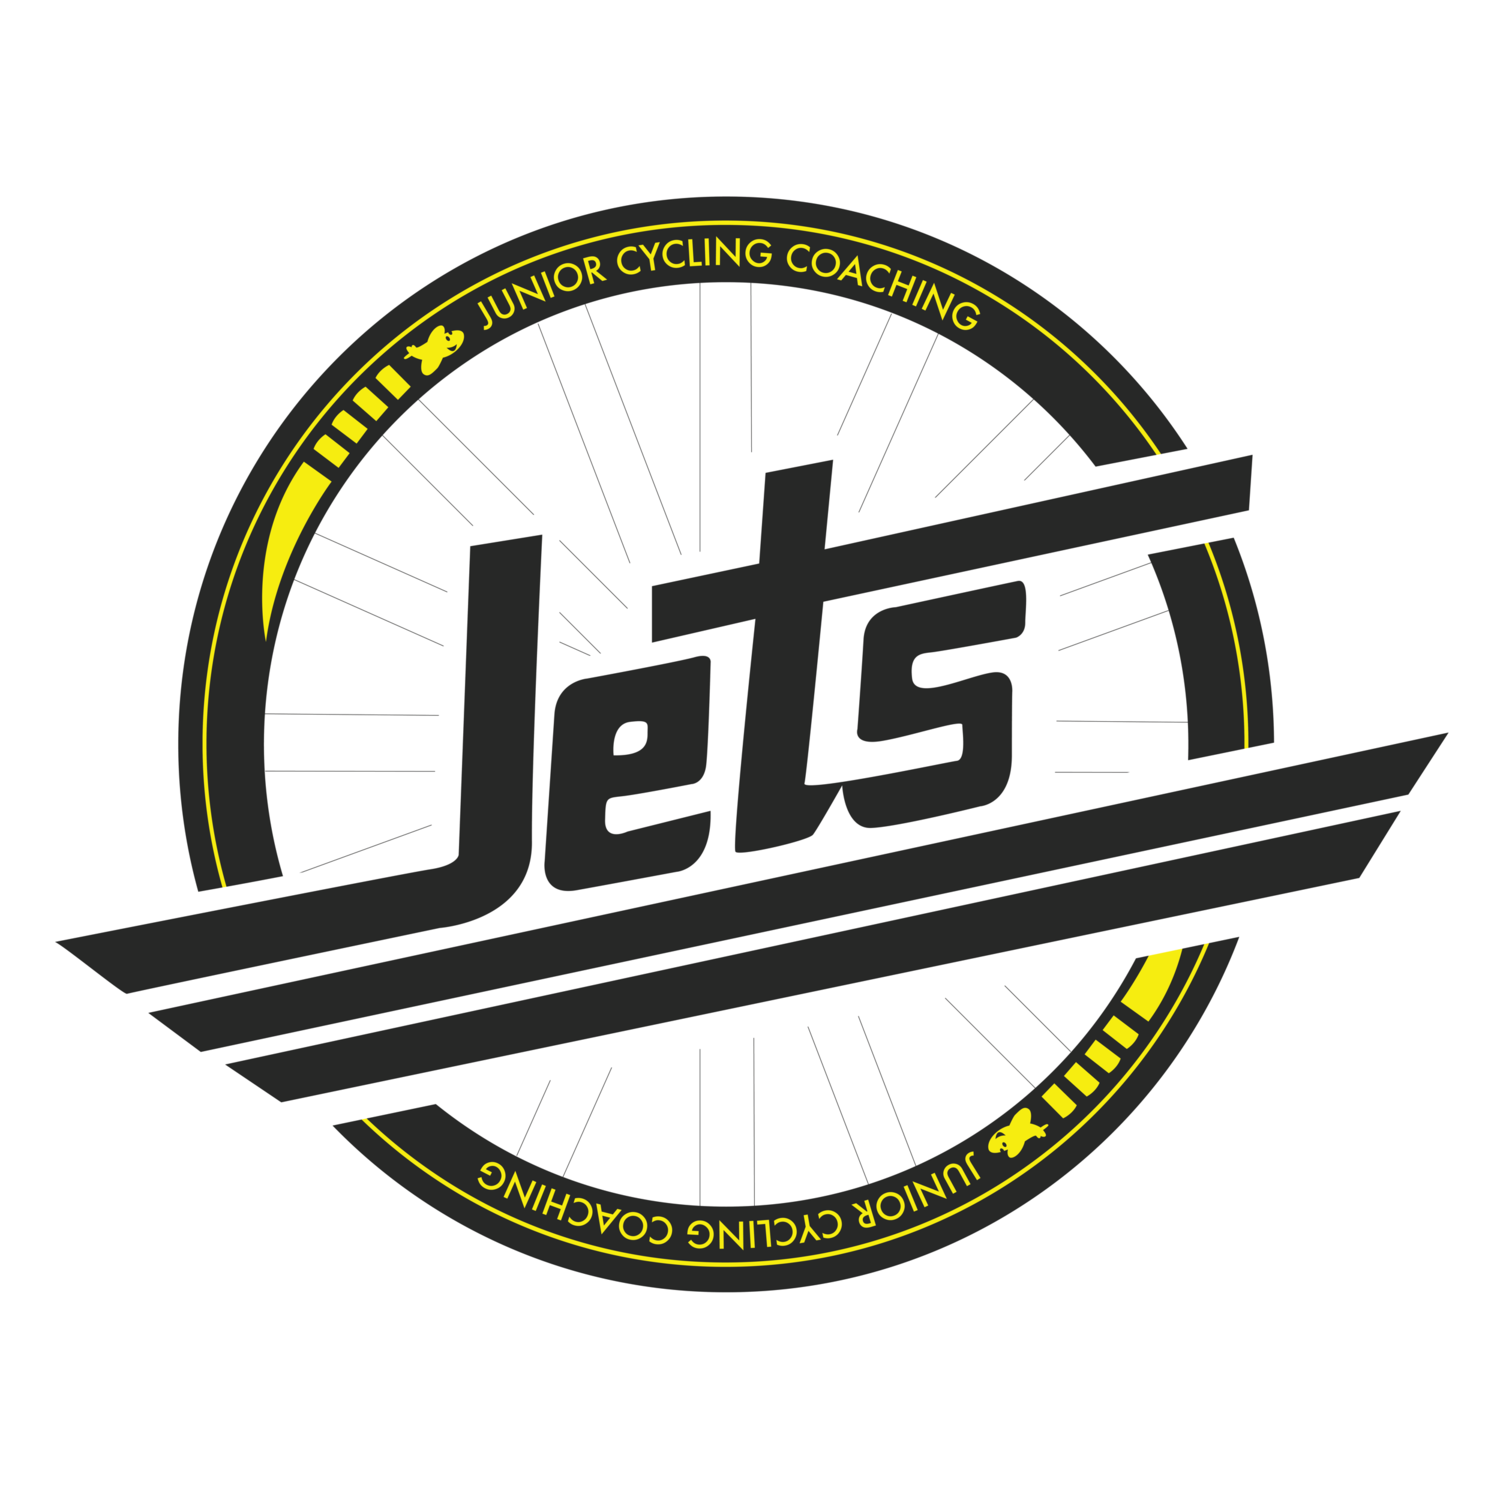 JETS Junior Cycling